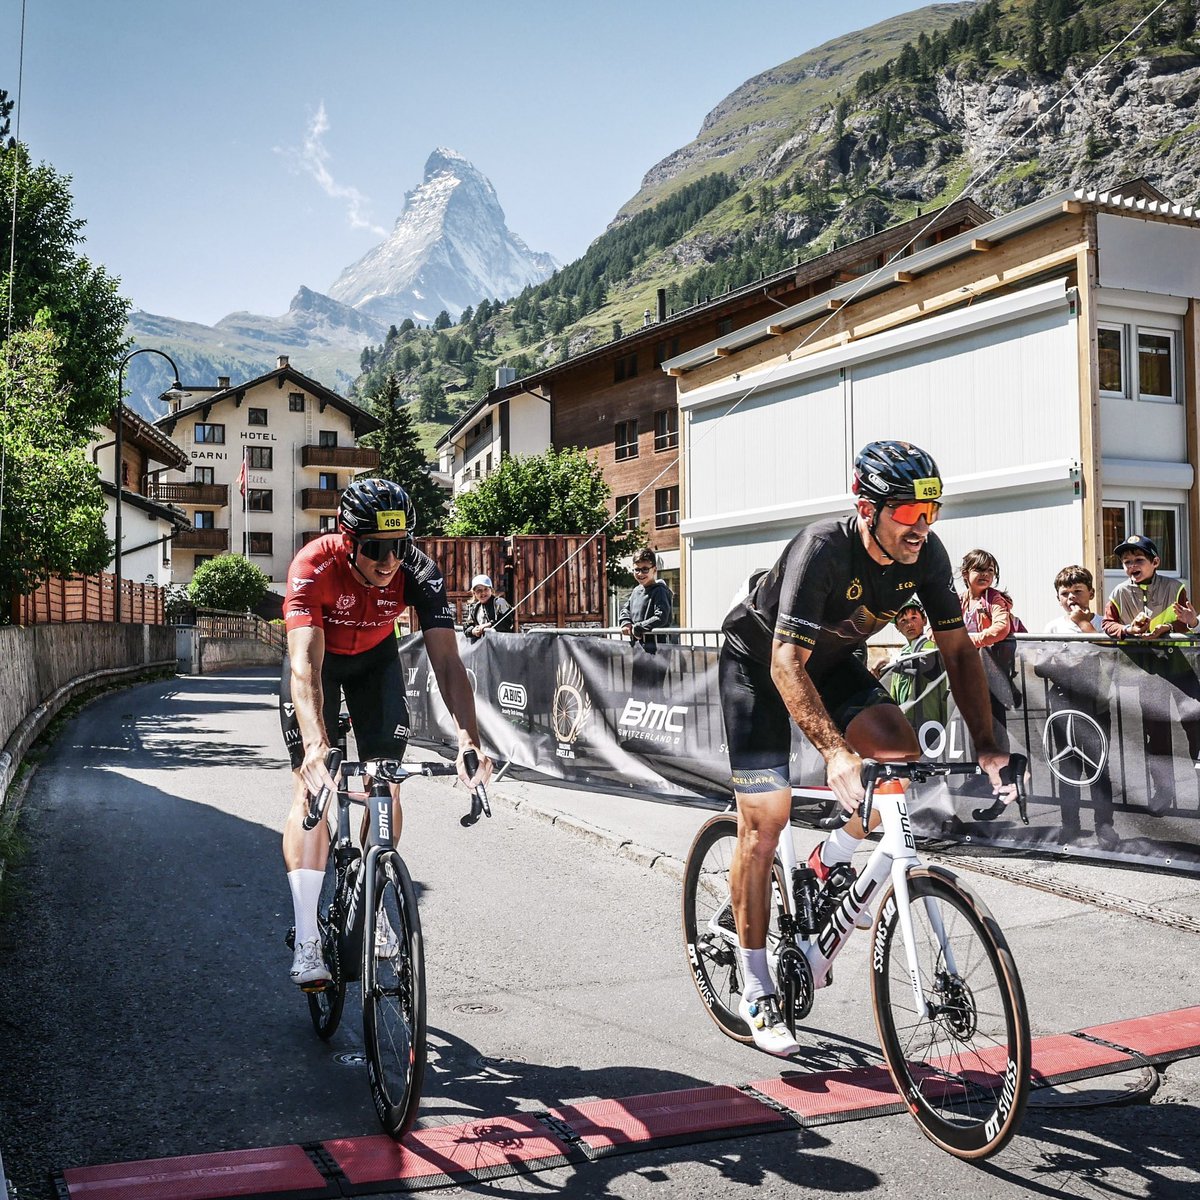 Are you looking for unique cycling experiences surrounded by stunning Swiss landscapes? 🤩 I got you: Join me at the @chasingcancellara events! The registration is open as of today! 🙌🏼 All details and information about the races 👉🏼 @chasingcancellara #ChasingCancellara